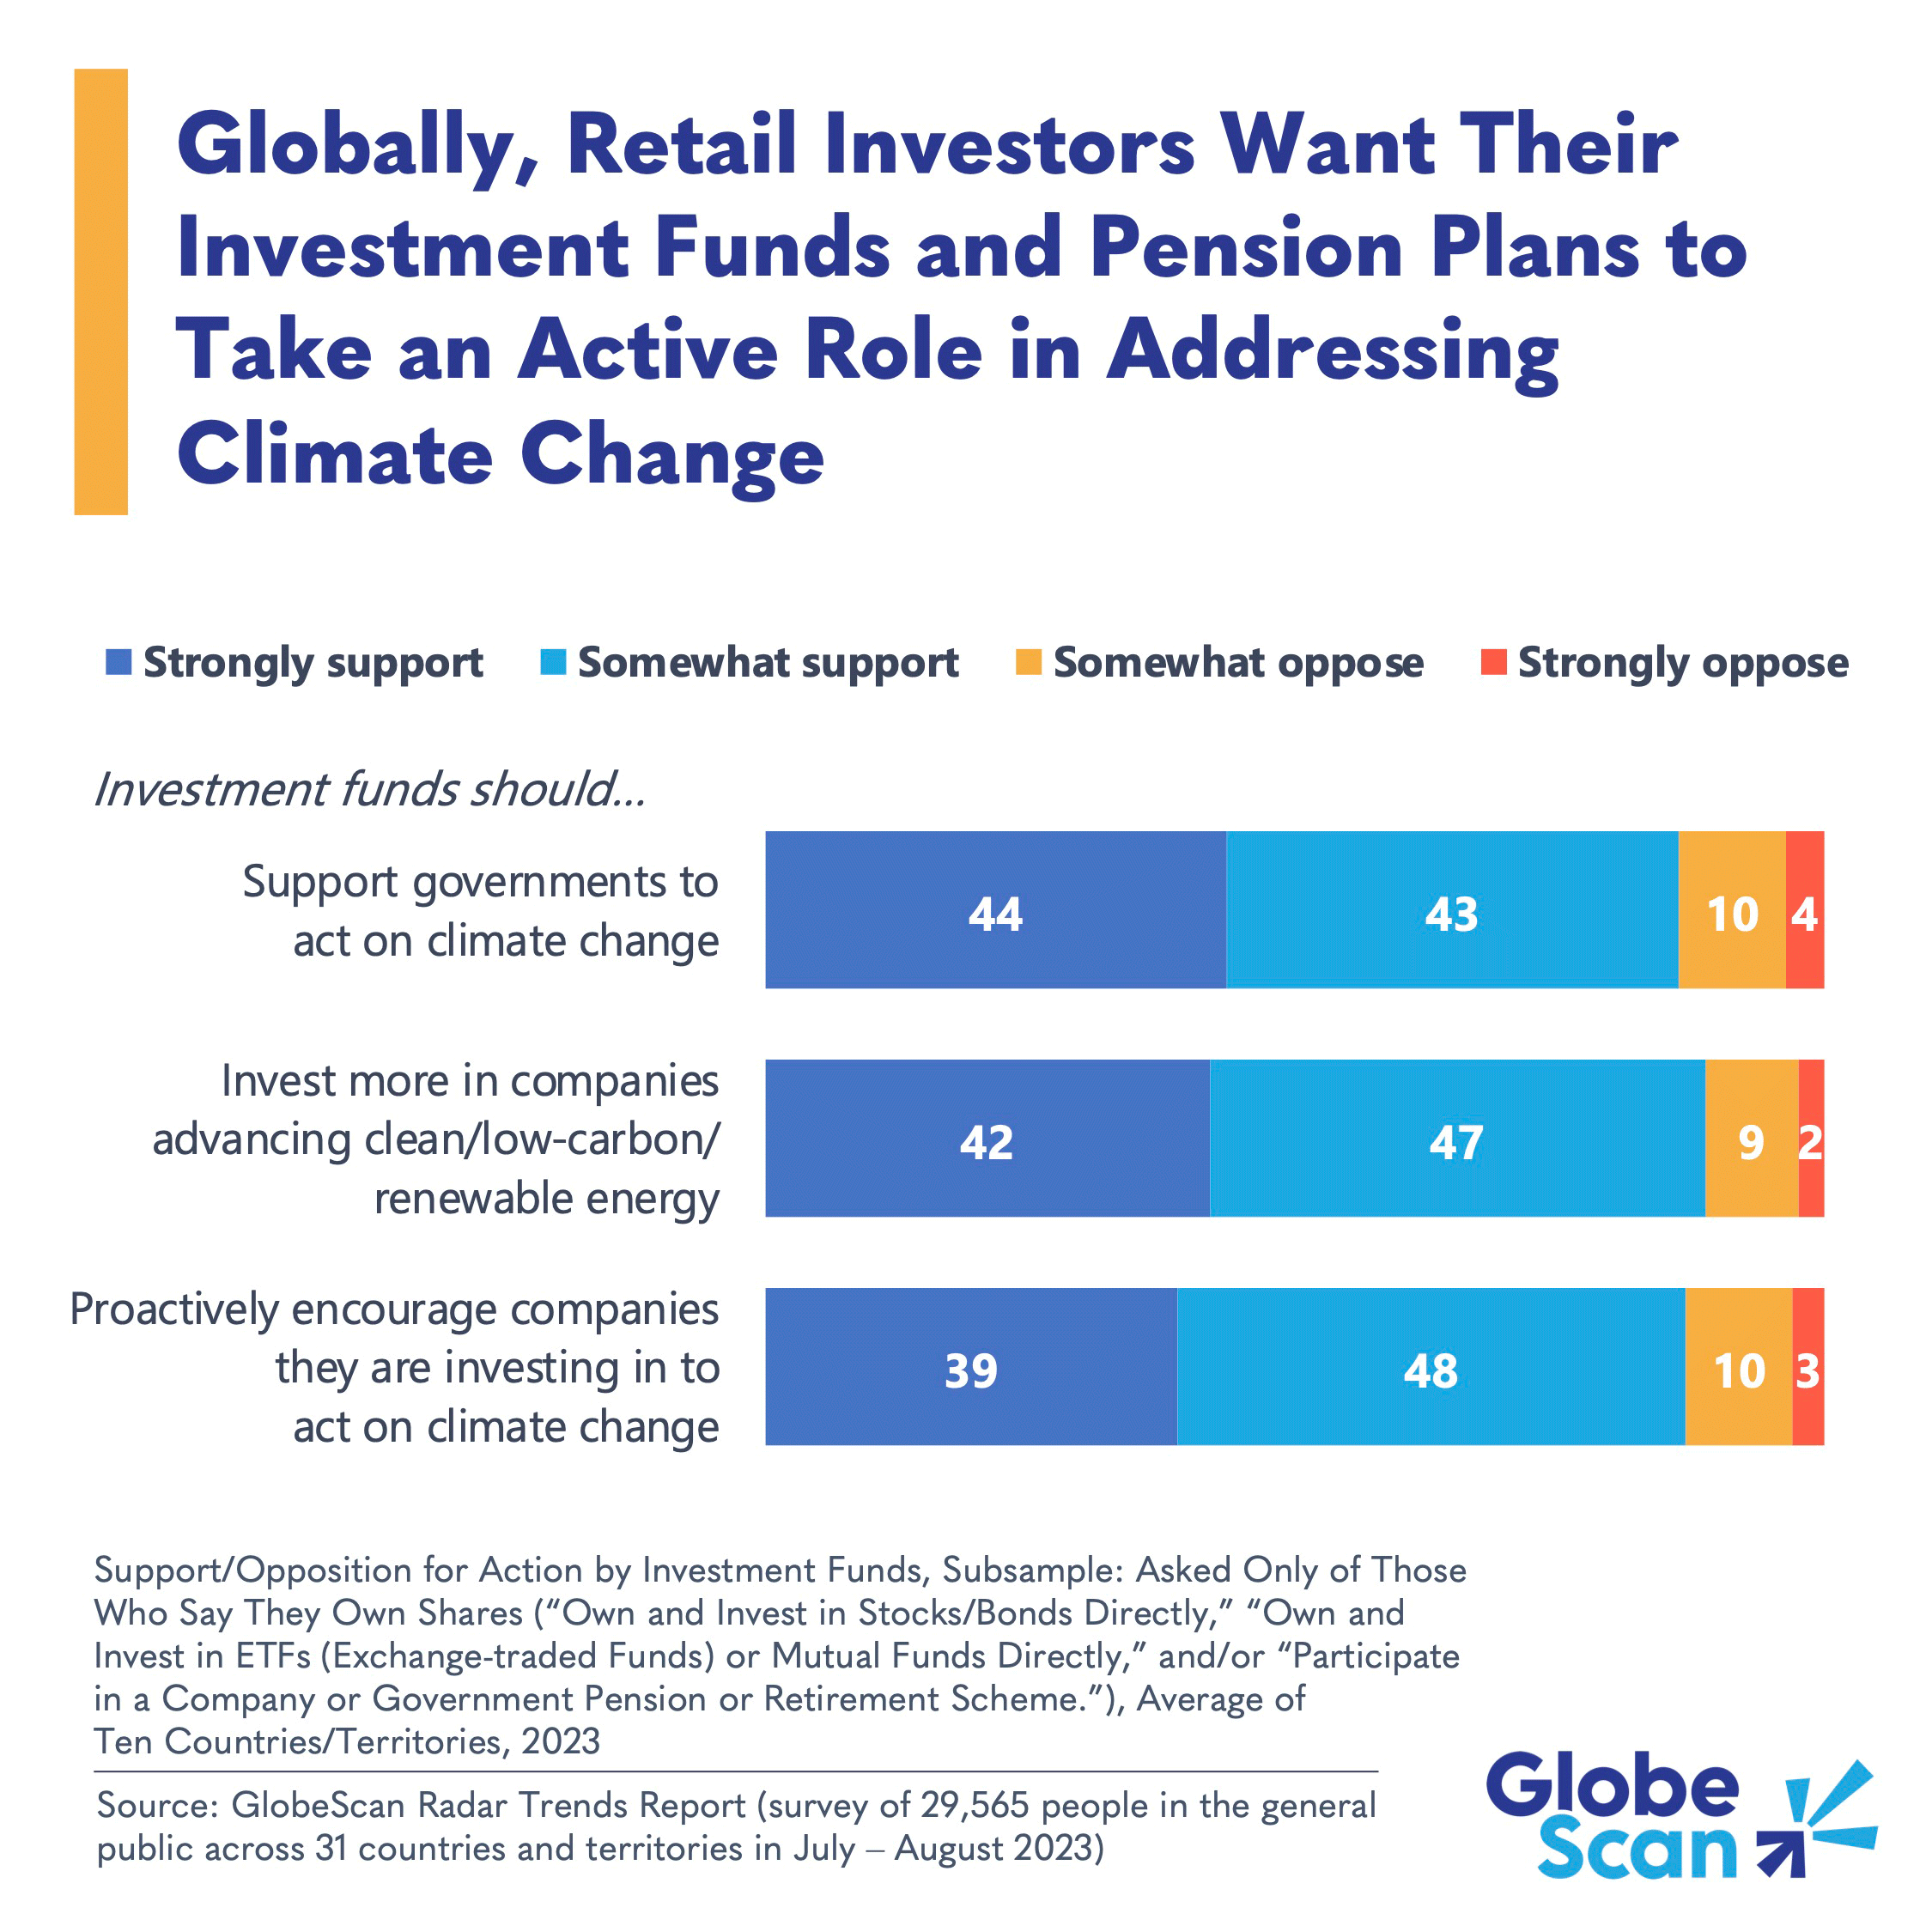 Globally, Retail Investors Want Their Investment Funds and Pension Plans to Take an Active Role in Addressing Climate Change